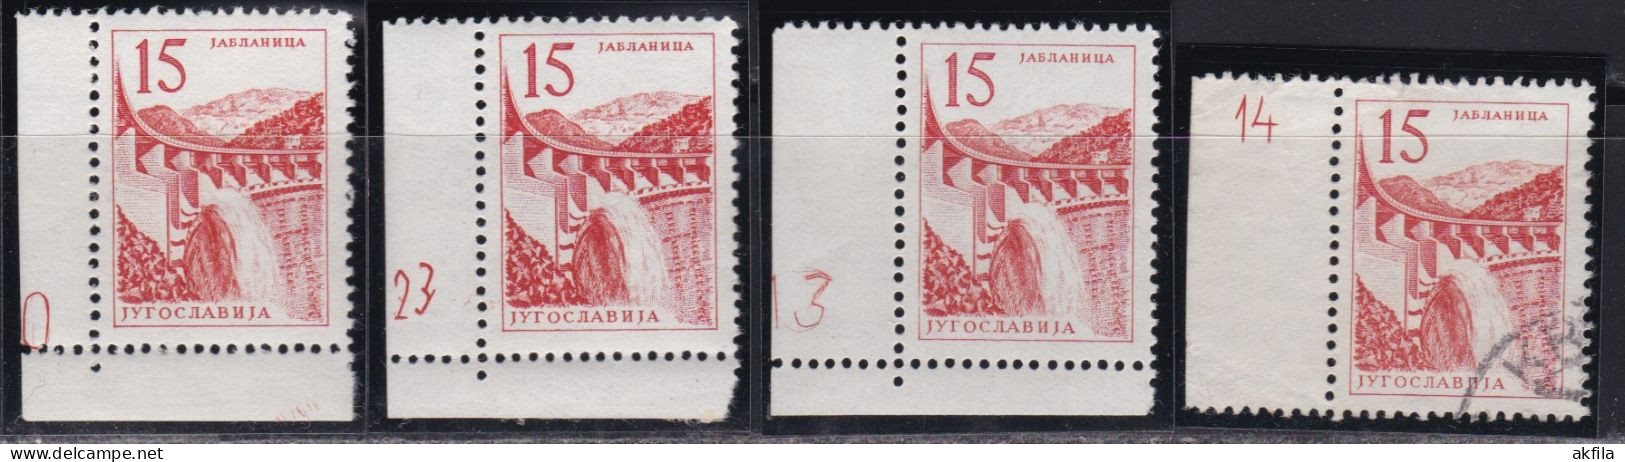 Yugoslavia 1958 Definitive Stamps With Printing Plate Markings, MNH And Used Michel 857. - Gebruikt